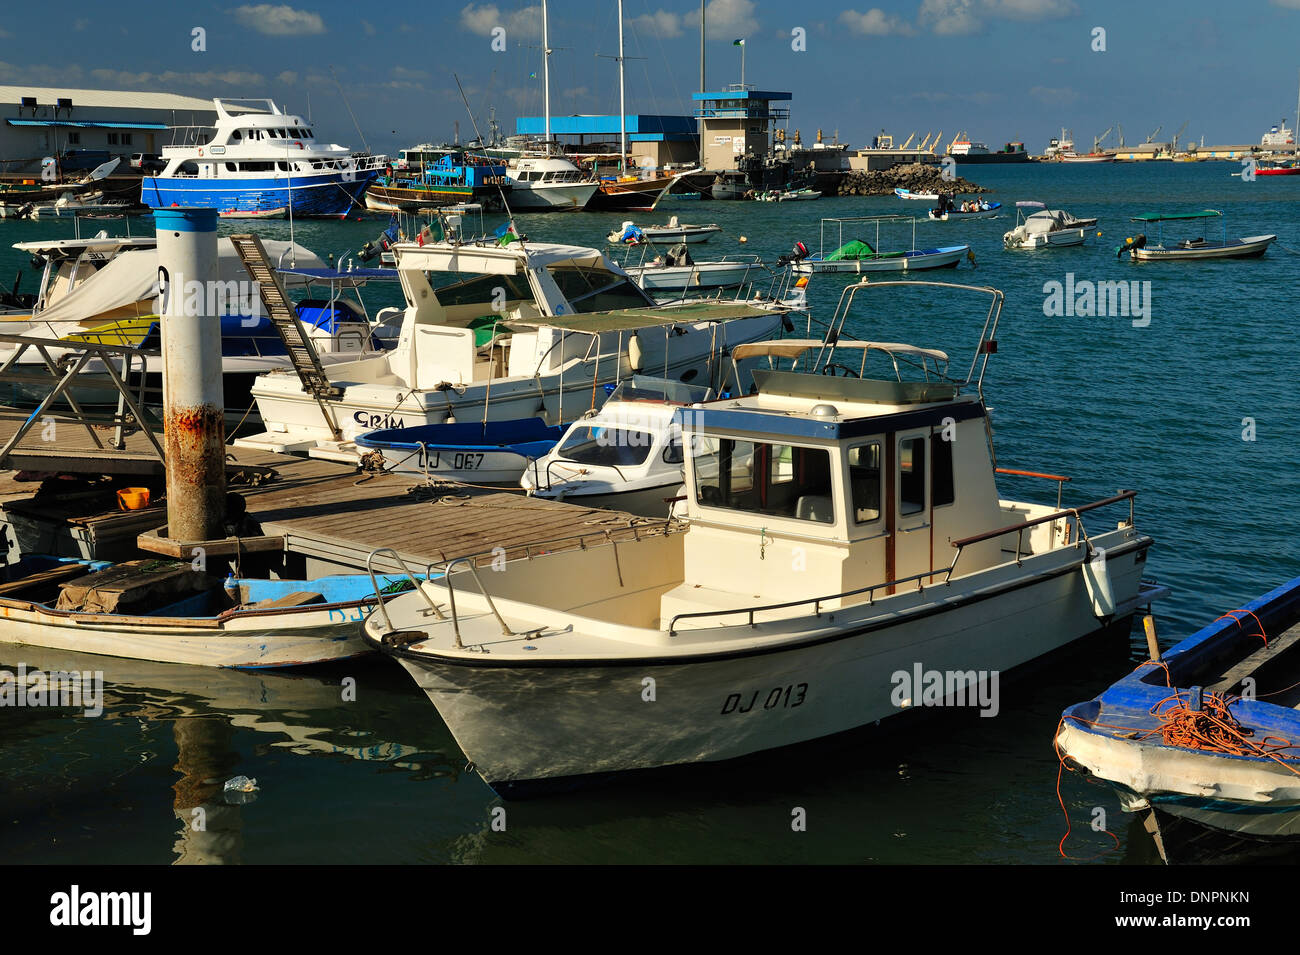 Fishing harbour of Djibouti city, Djibouti, Horn of Africa Stock Photo ...